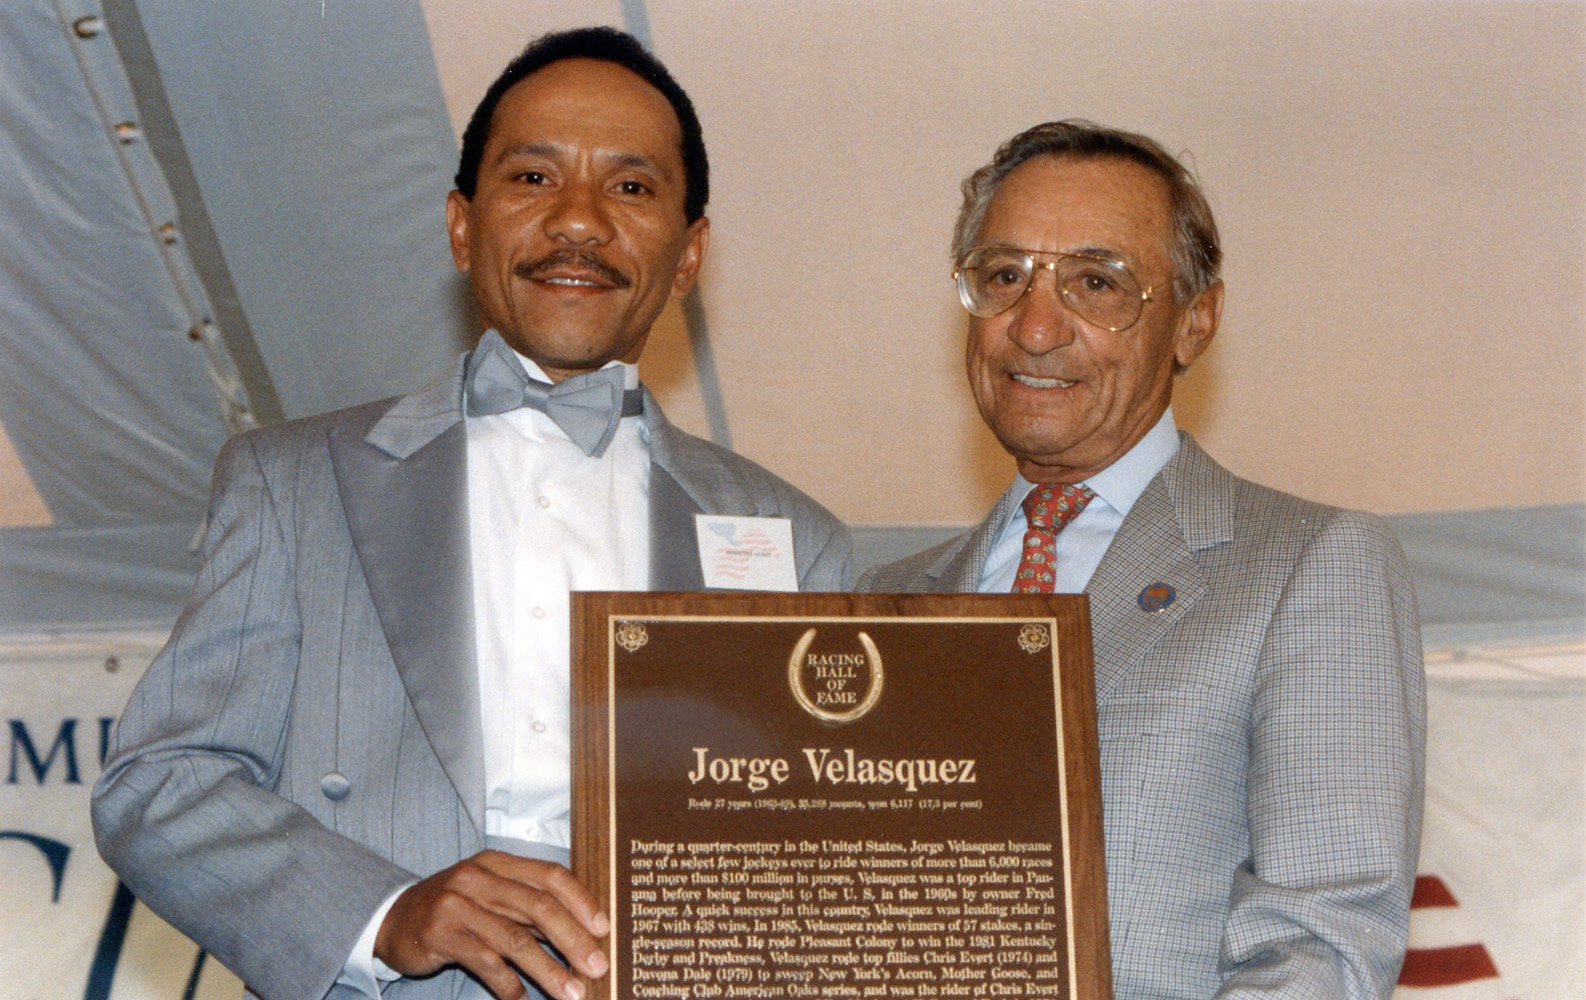 Jorge Velasquez at his Hall of Fame induction with fellow Hall of Famer Eddie Arcaro in 1990 (Barbara D. Livingston/Museum Collection)